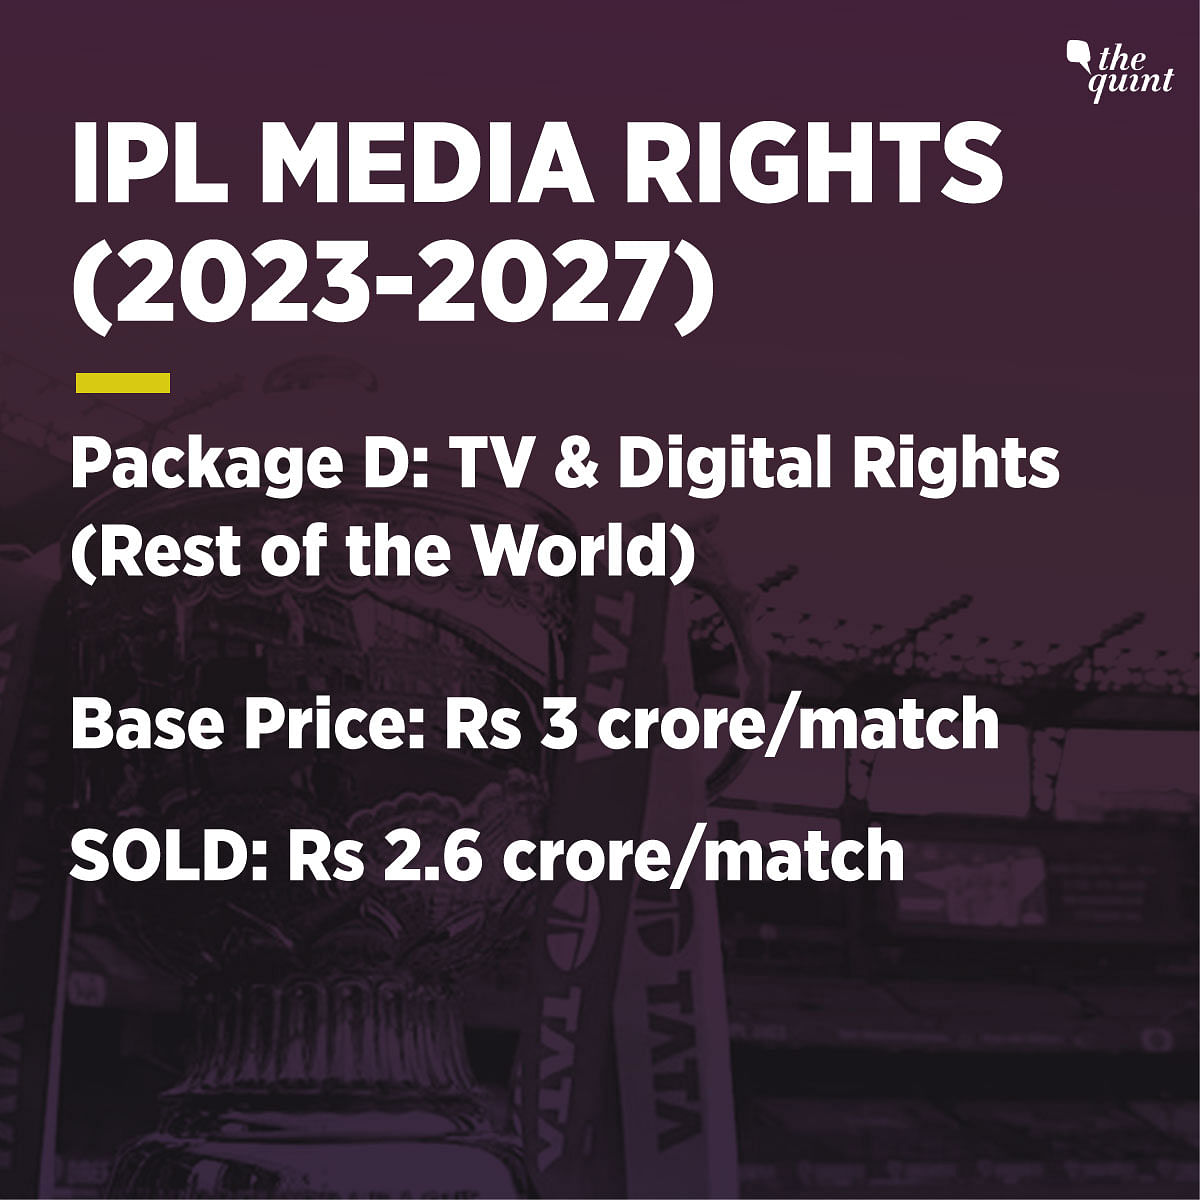 The digital rights of the IPL have been sold for over Rs 23,757 crore.